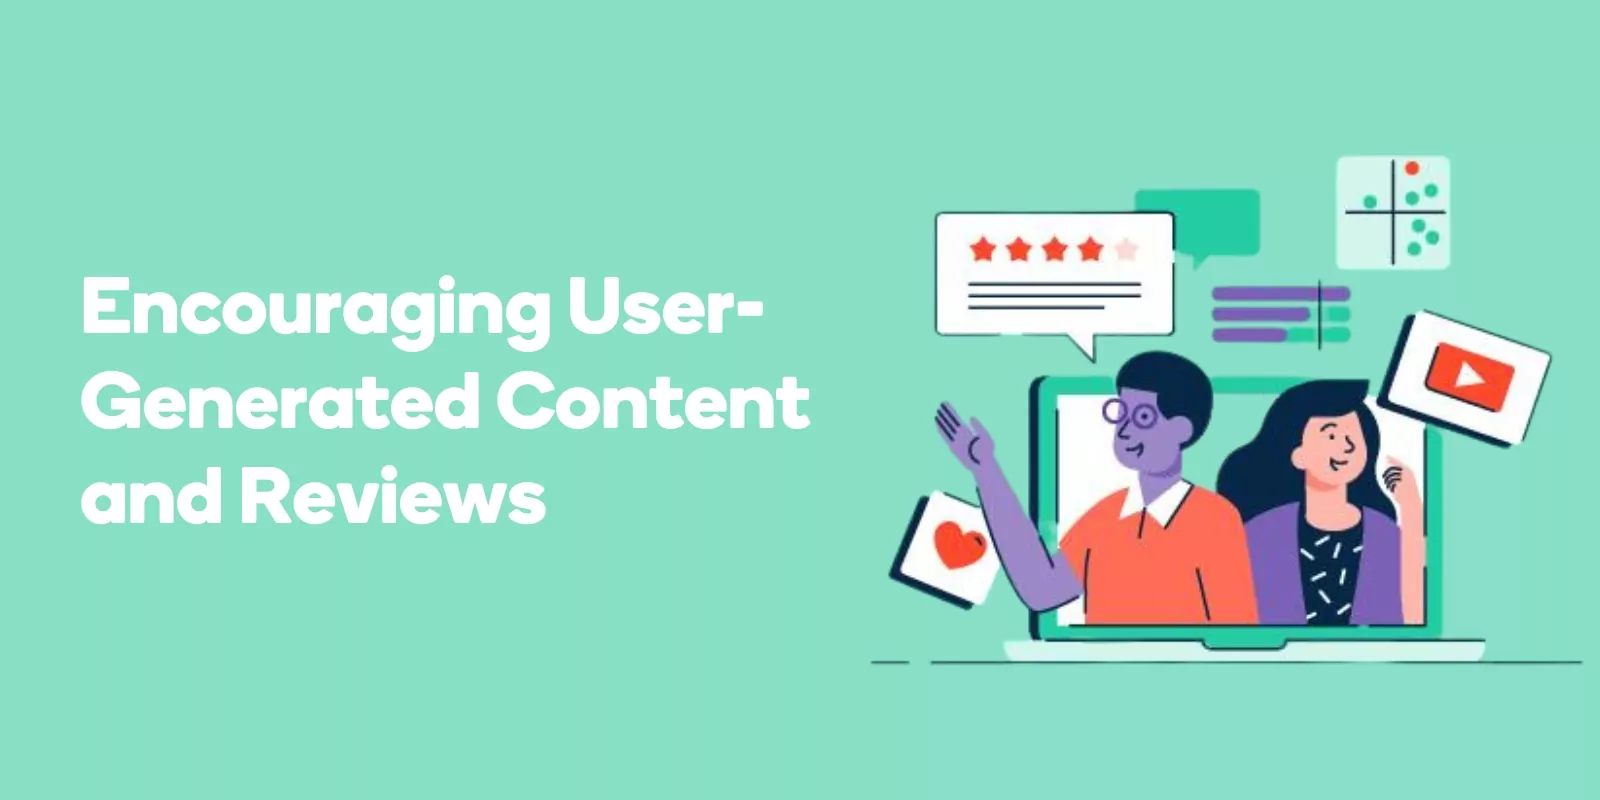 Encouraging User-Generated Content and Reviews